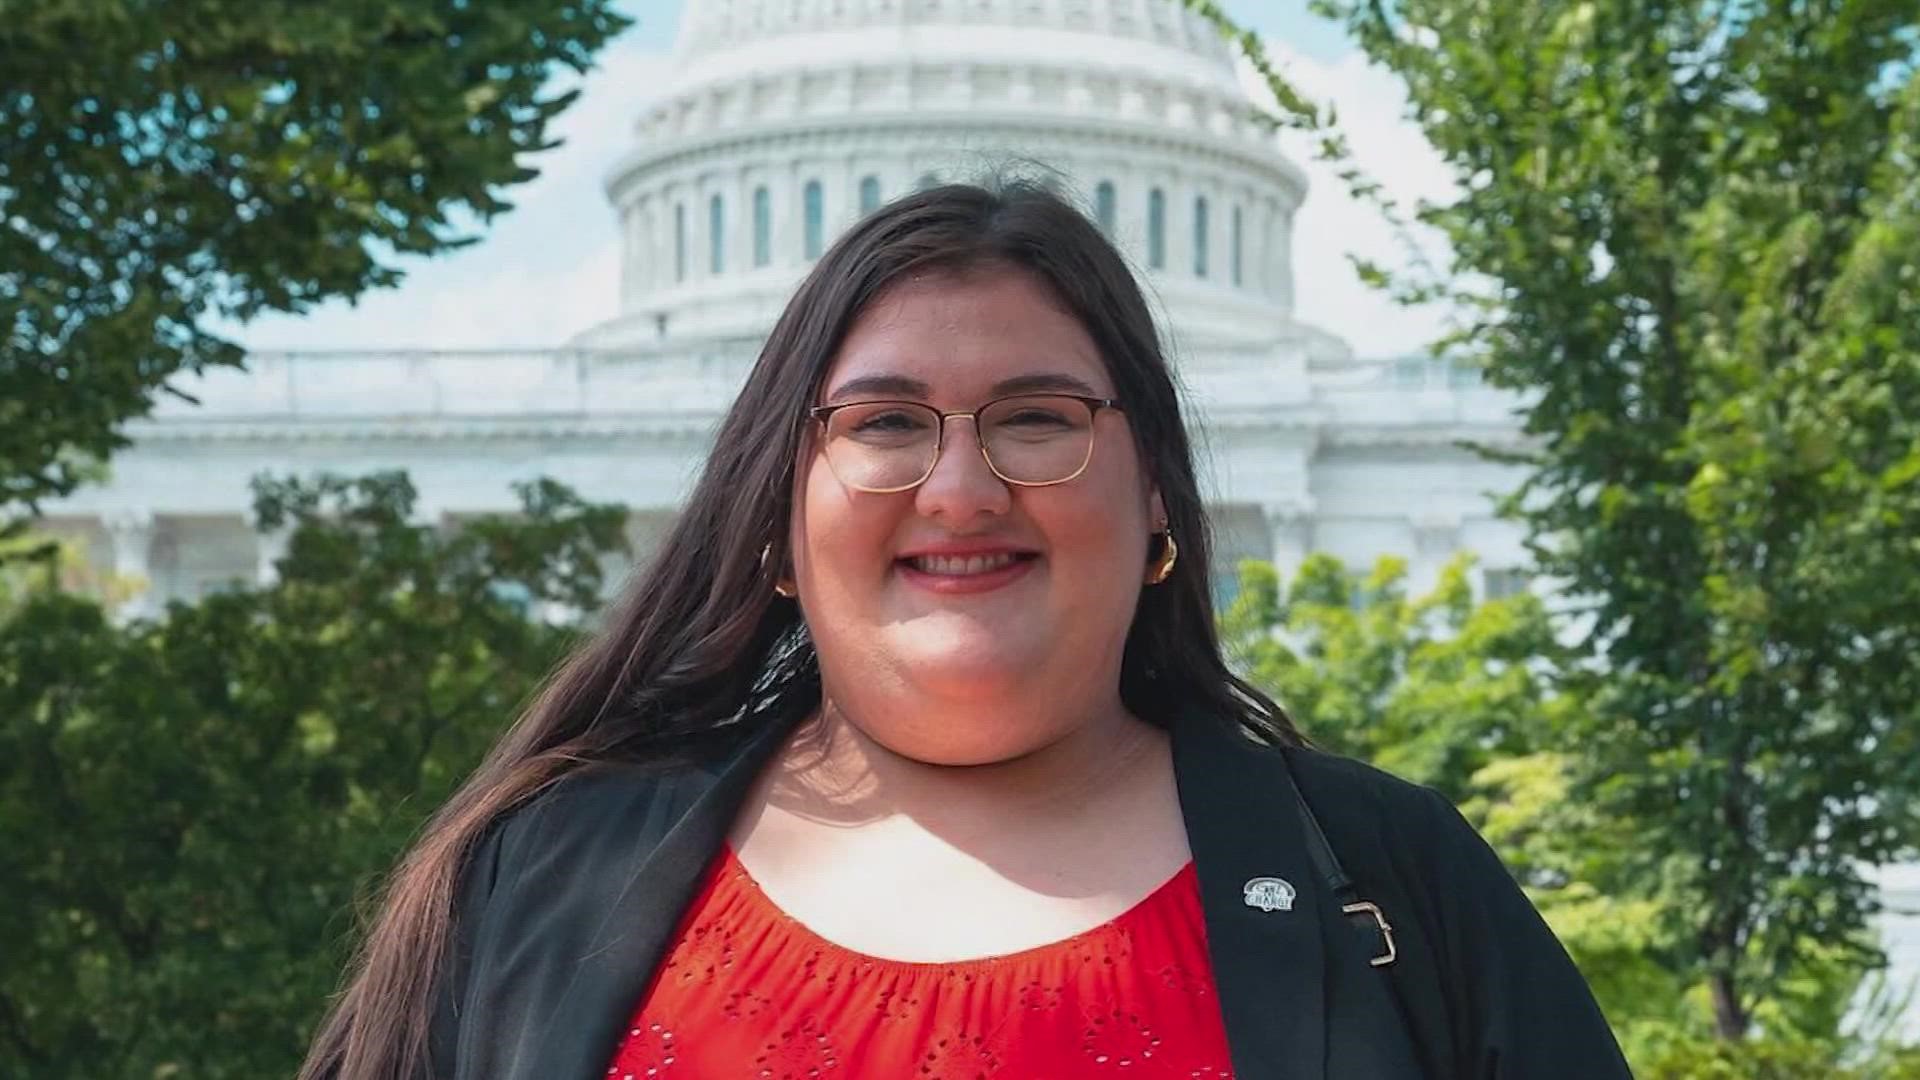 When Rep. Gaetz called abortion rights activists overweight and unattractive, Olivia Julianna didn't back down. She turned his insult into a fundraiser.